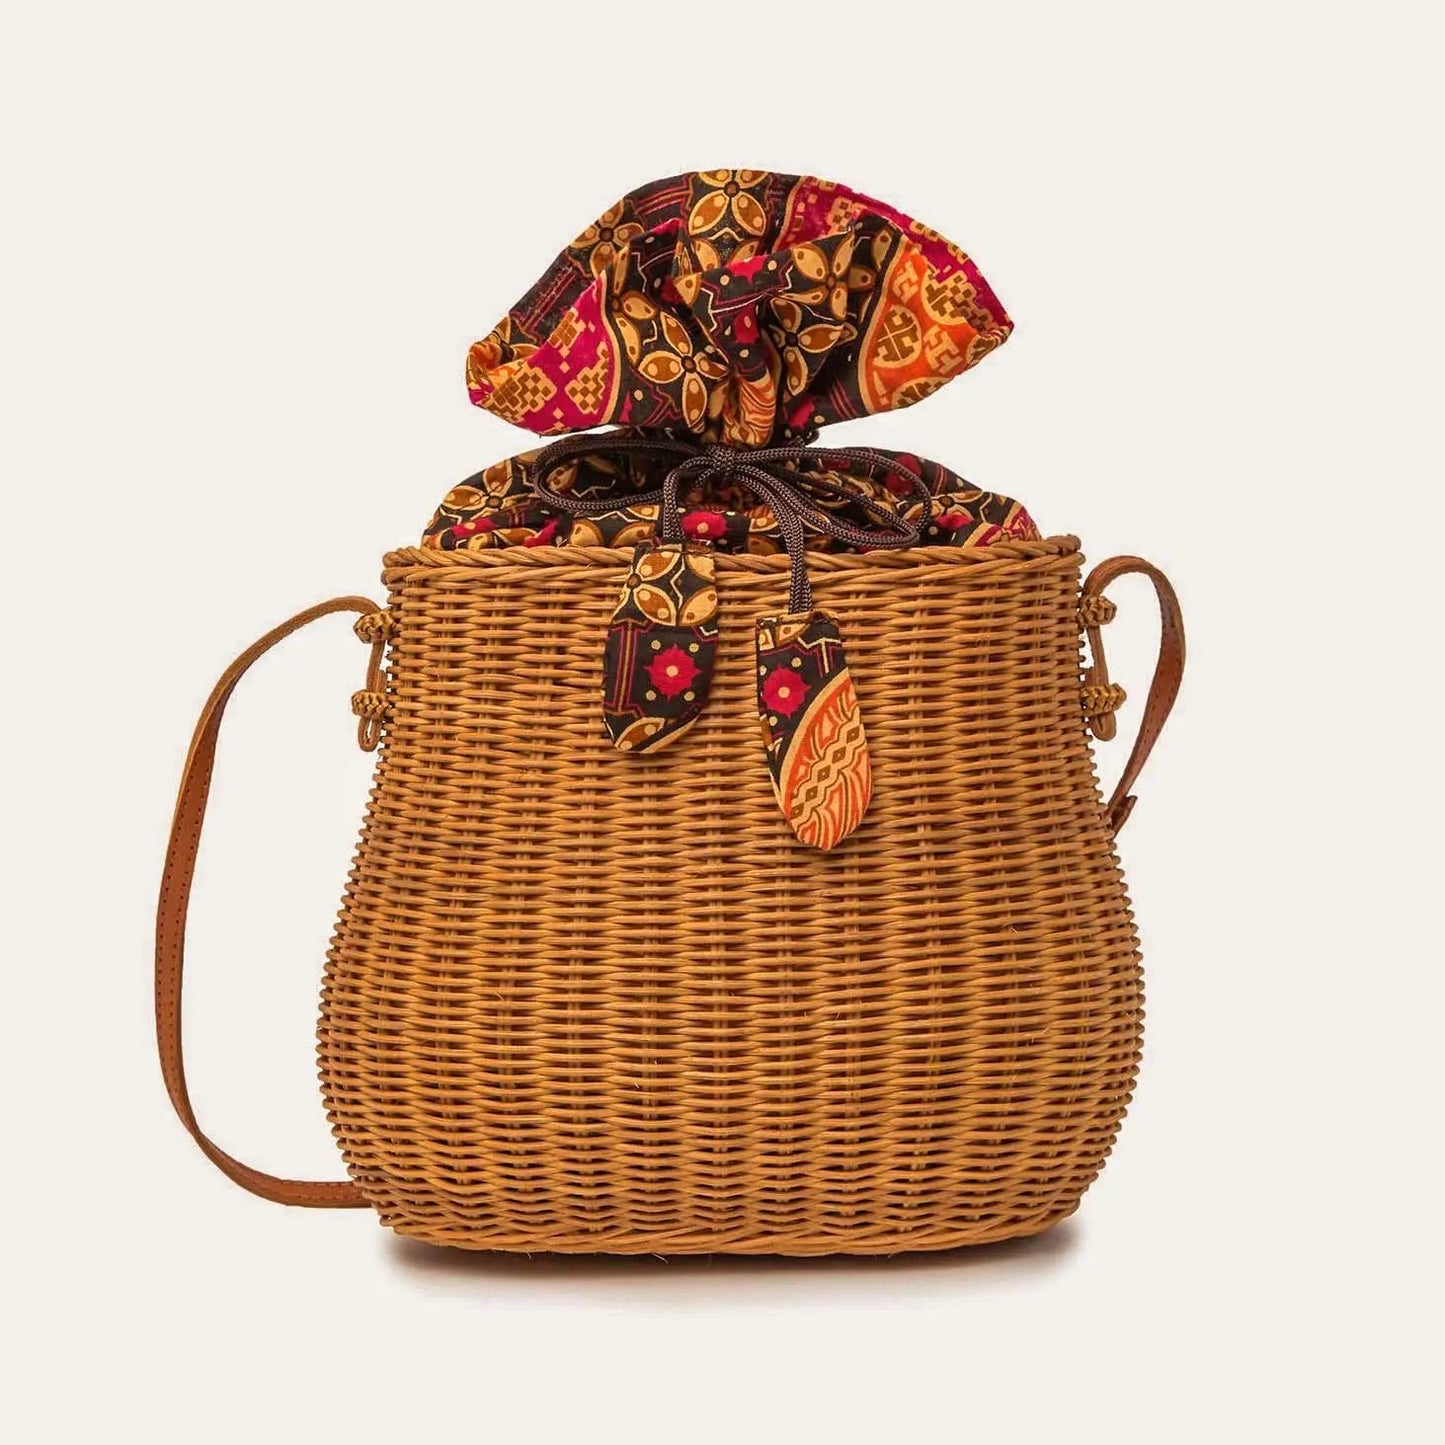 Woven Bag, Handmade in Bali, Recycled Material, Sumiye Co